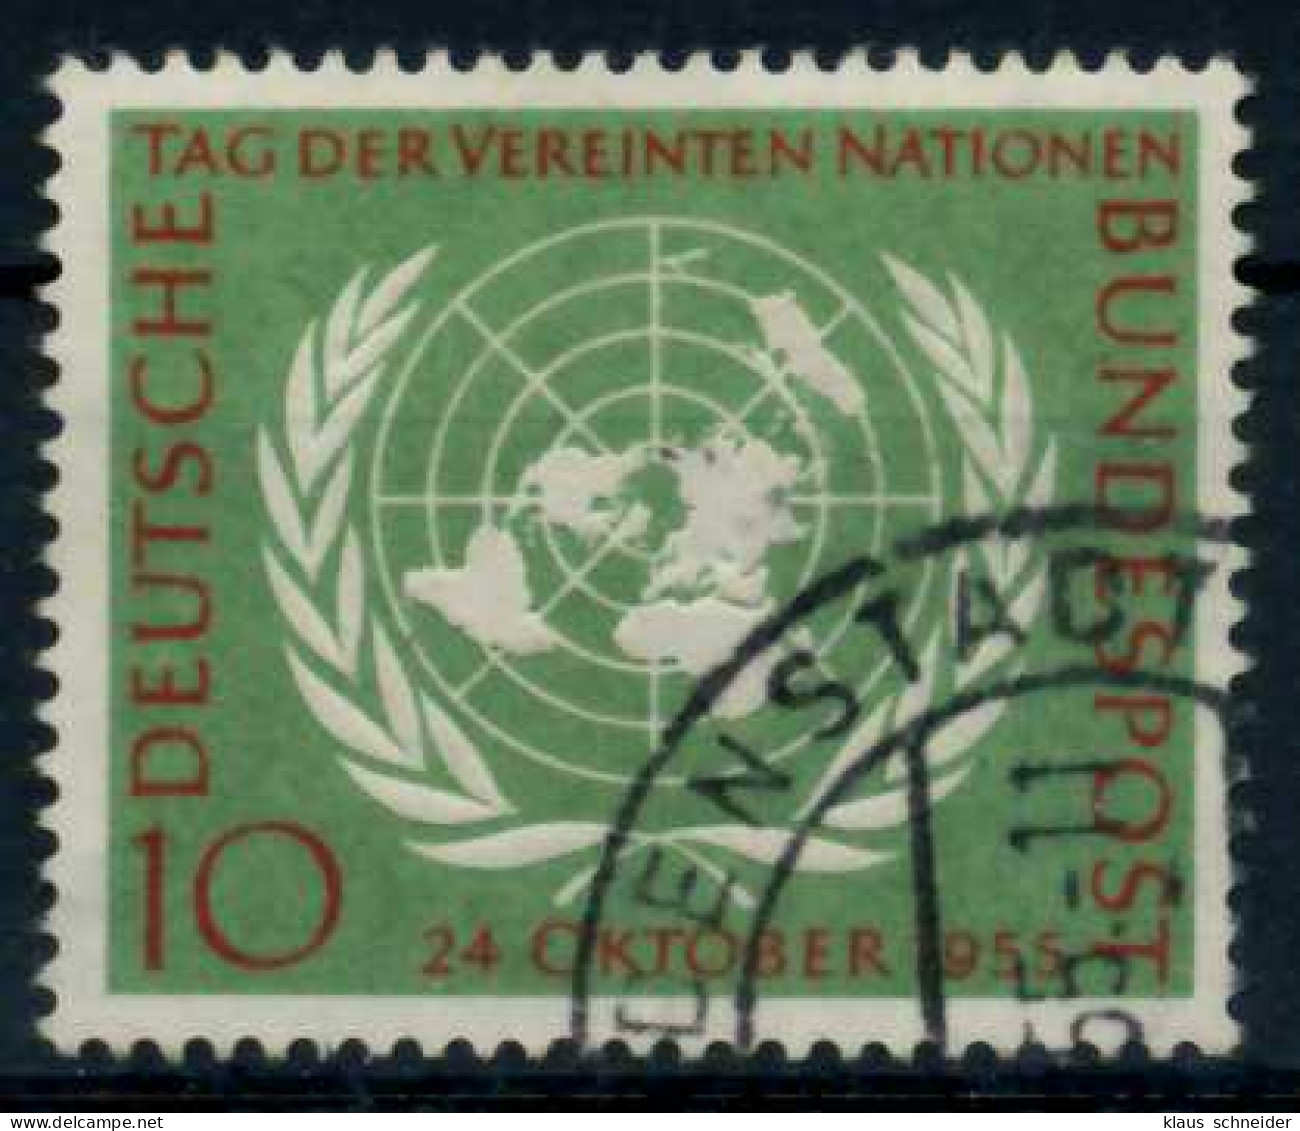 BRD 1955 Nr 221 Gestempelt X77A466 - Used Stamps